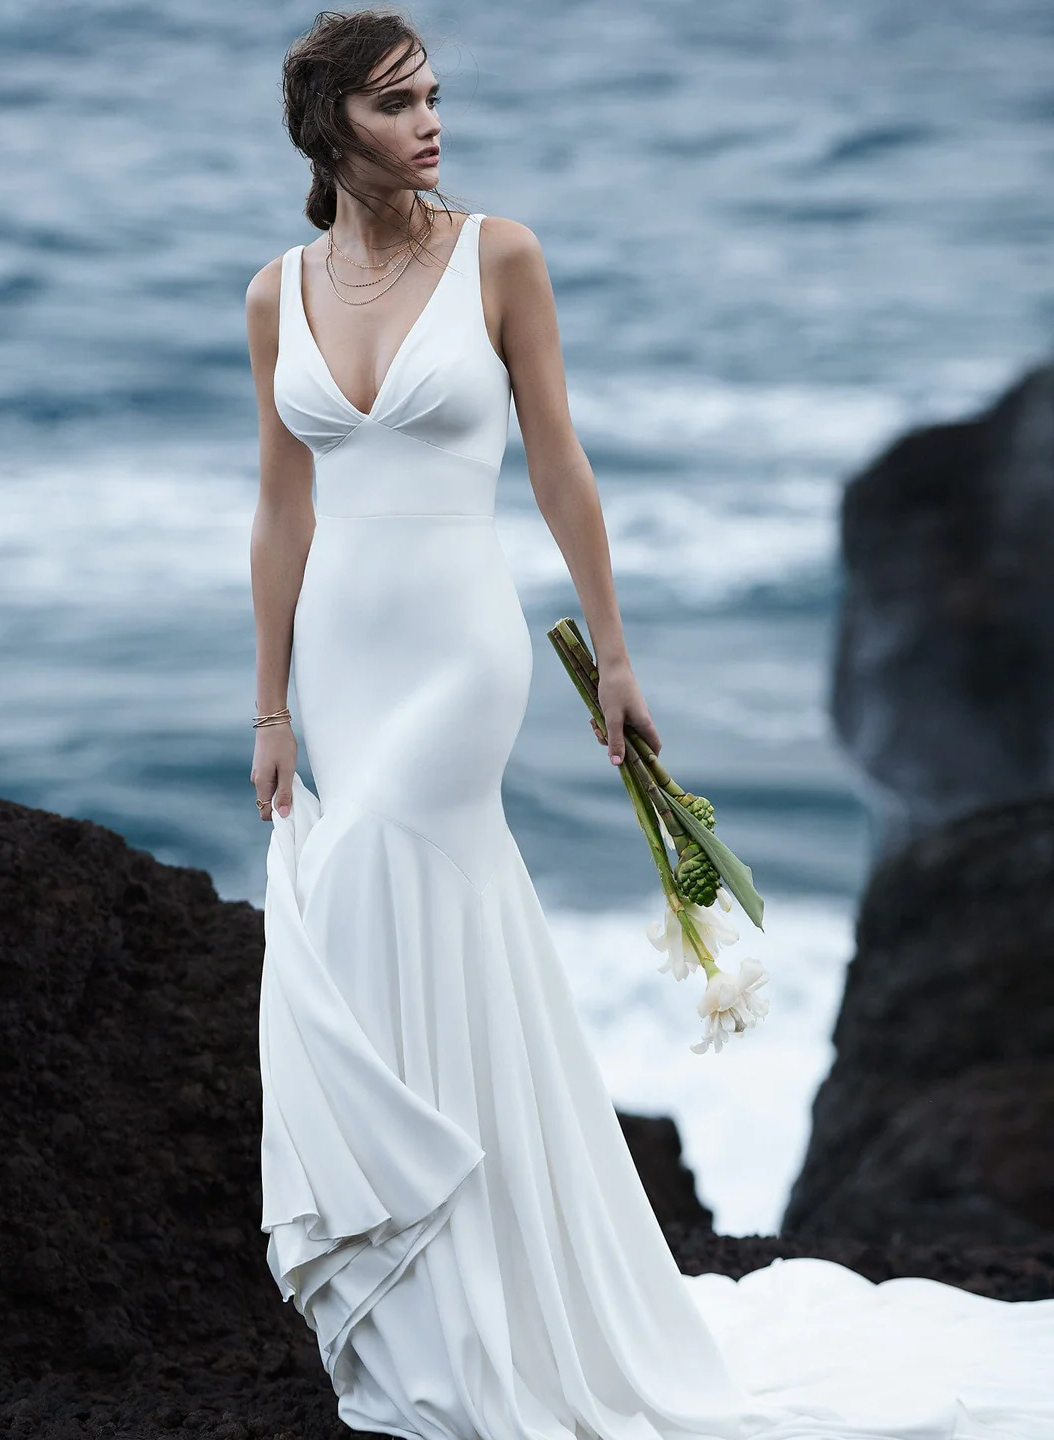 Simple Trumpet/Mermaid V-Neck Wedding Dresses With Covered Button